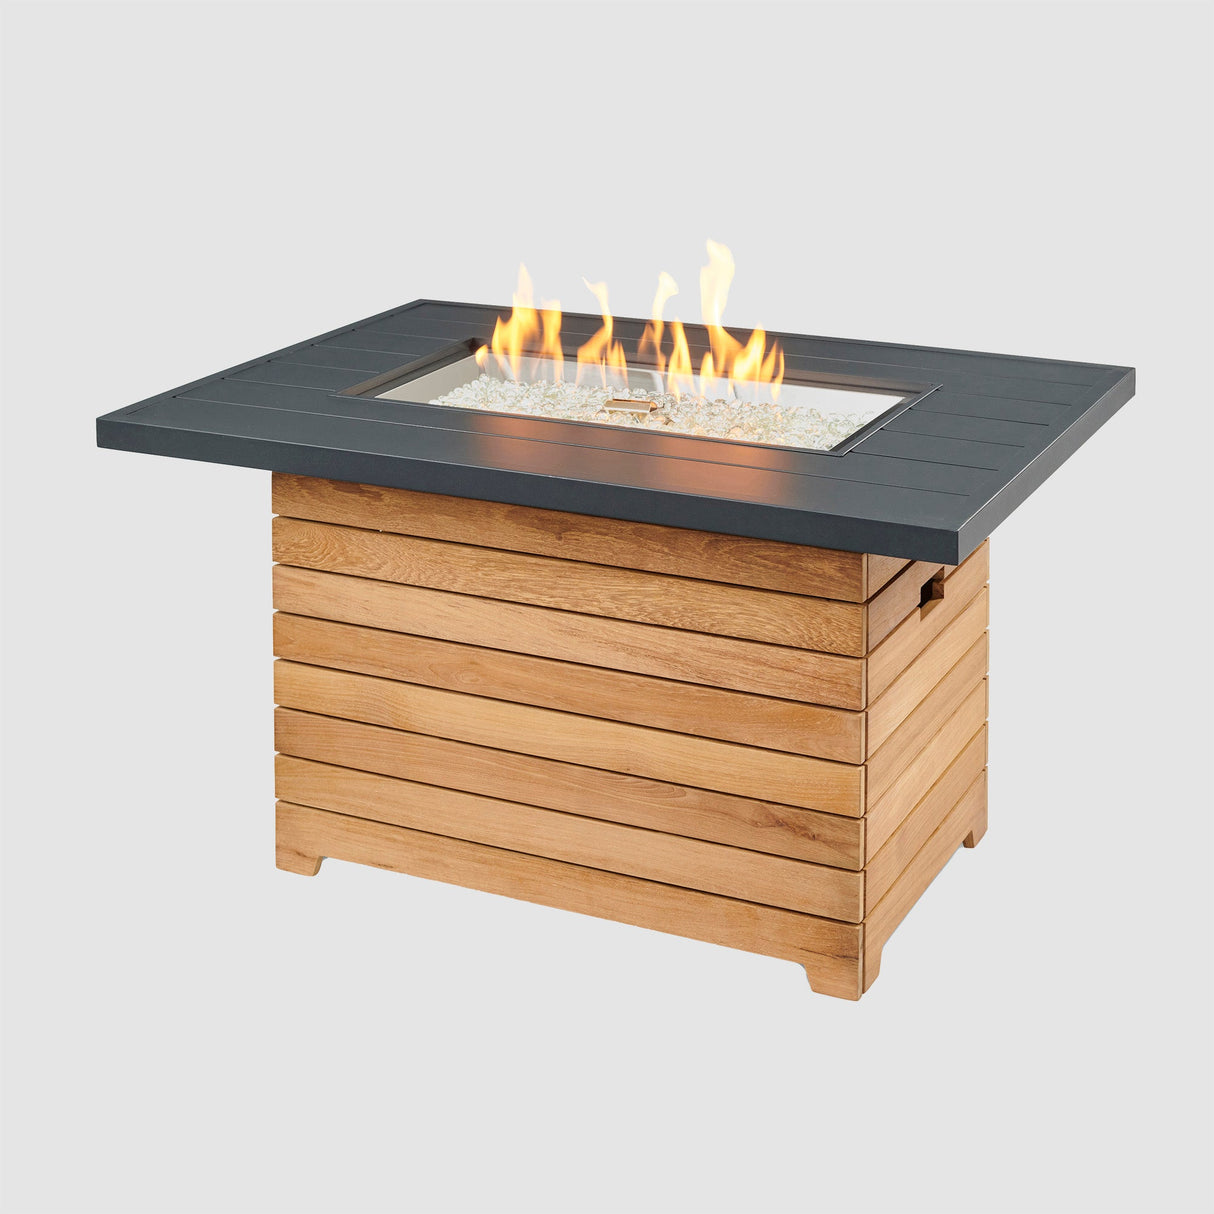 Darien Rectangular Gas Fire Pit Table with an Aluminum top on a grey background